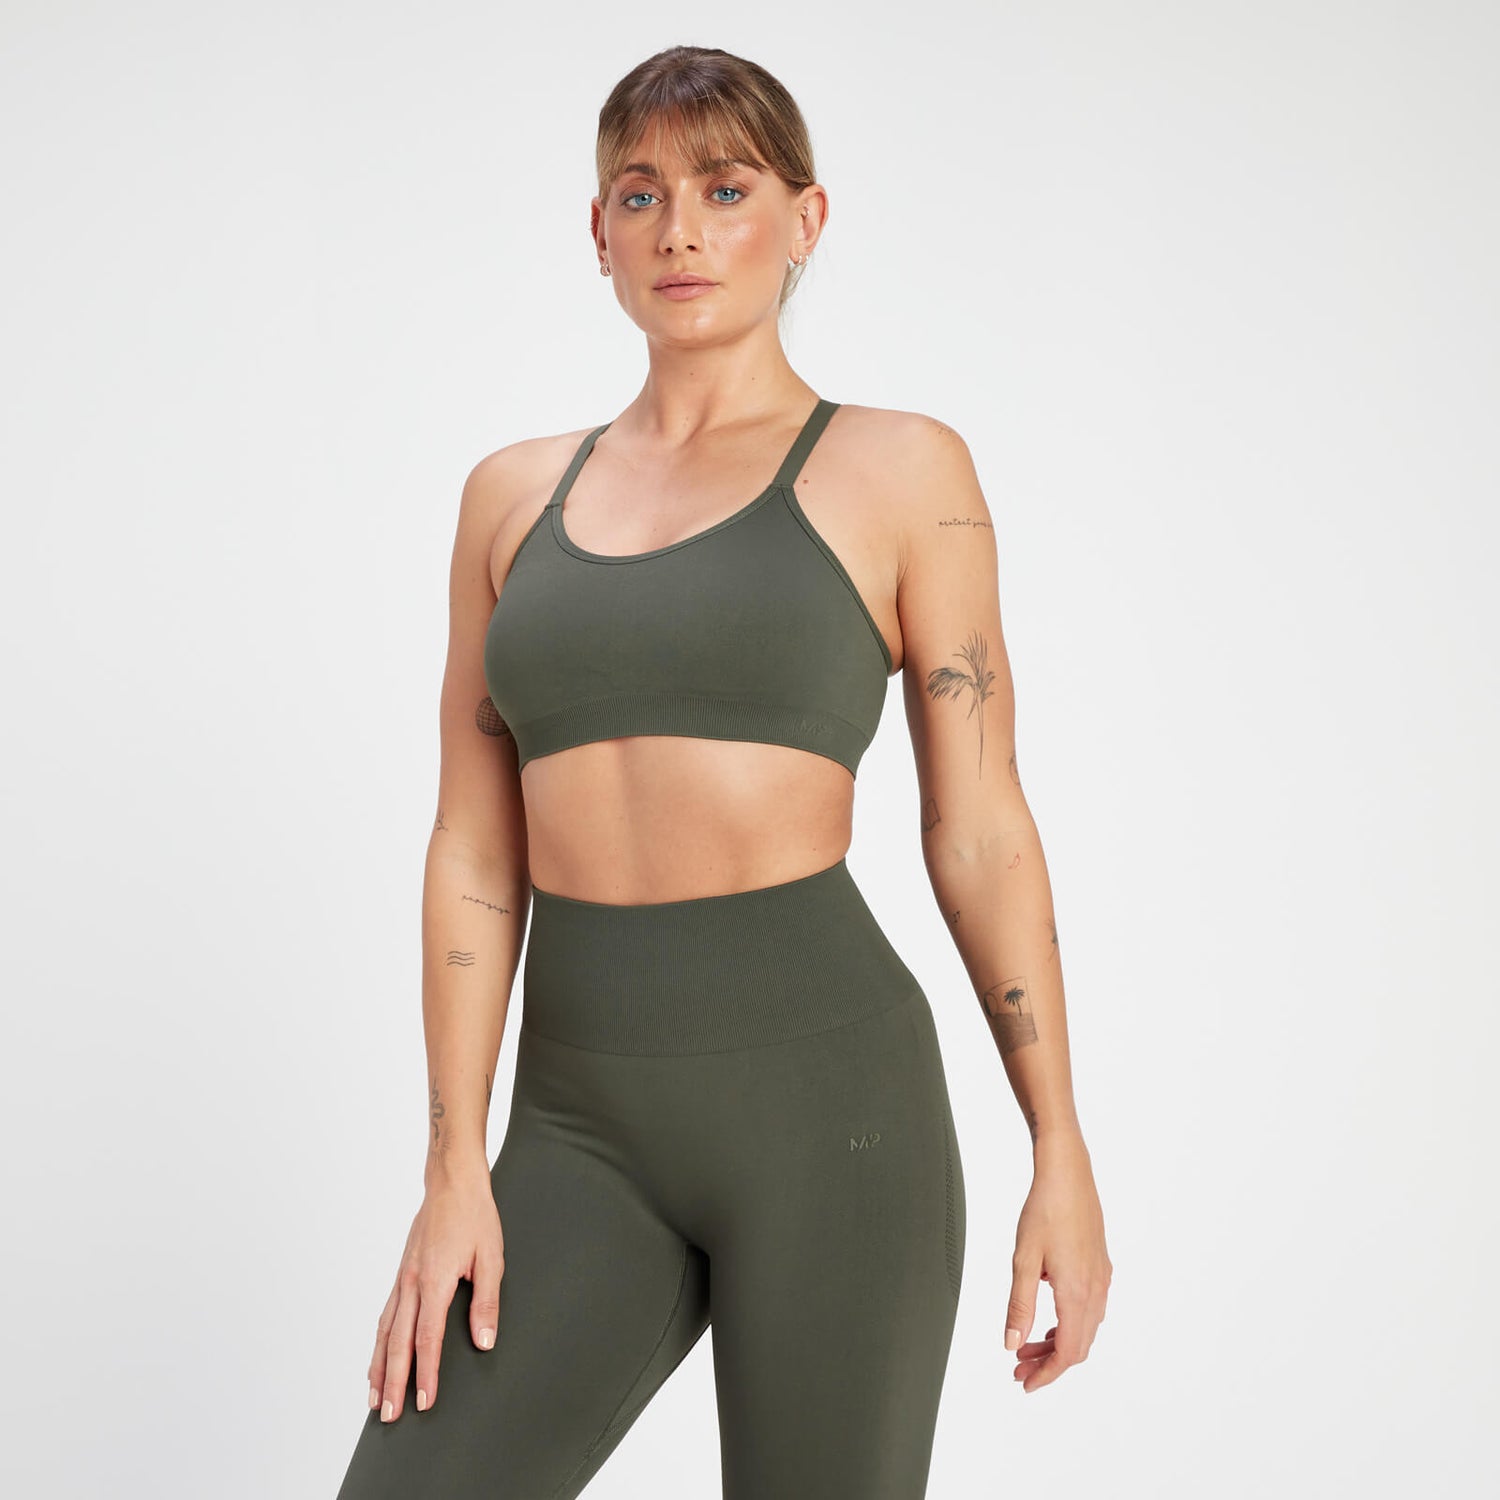 MP Women's Rest Day Seamless Cross Back Sports Bra - Taupe Green 